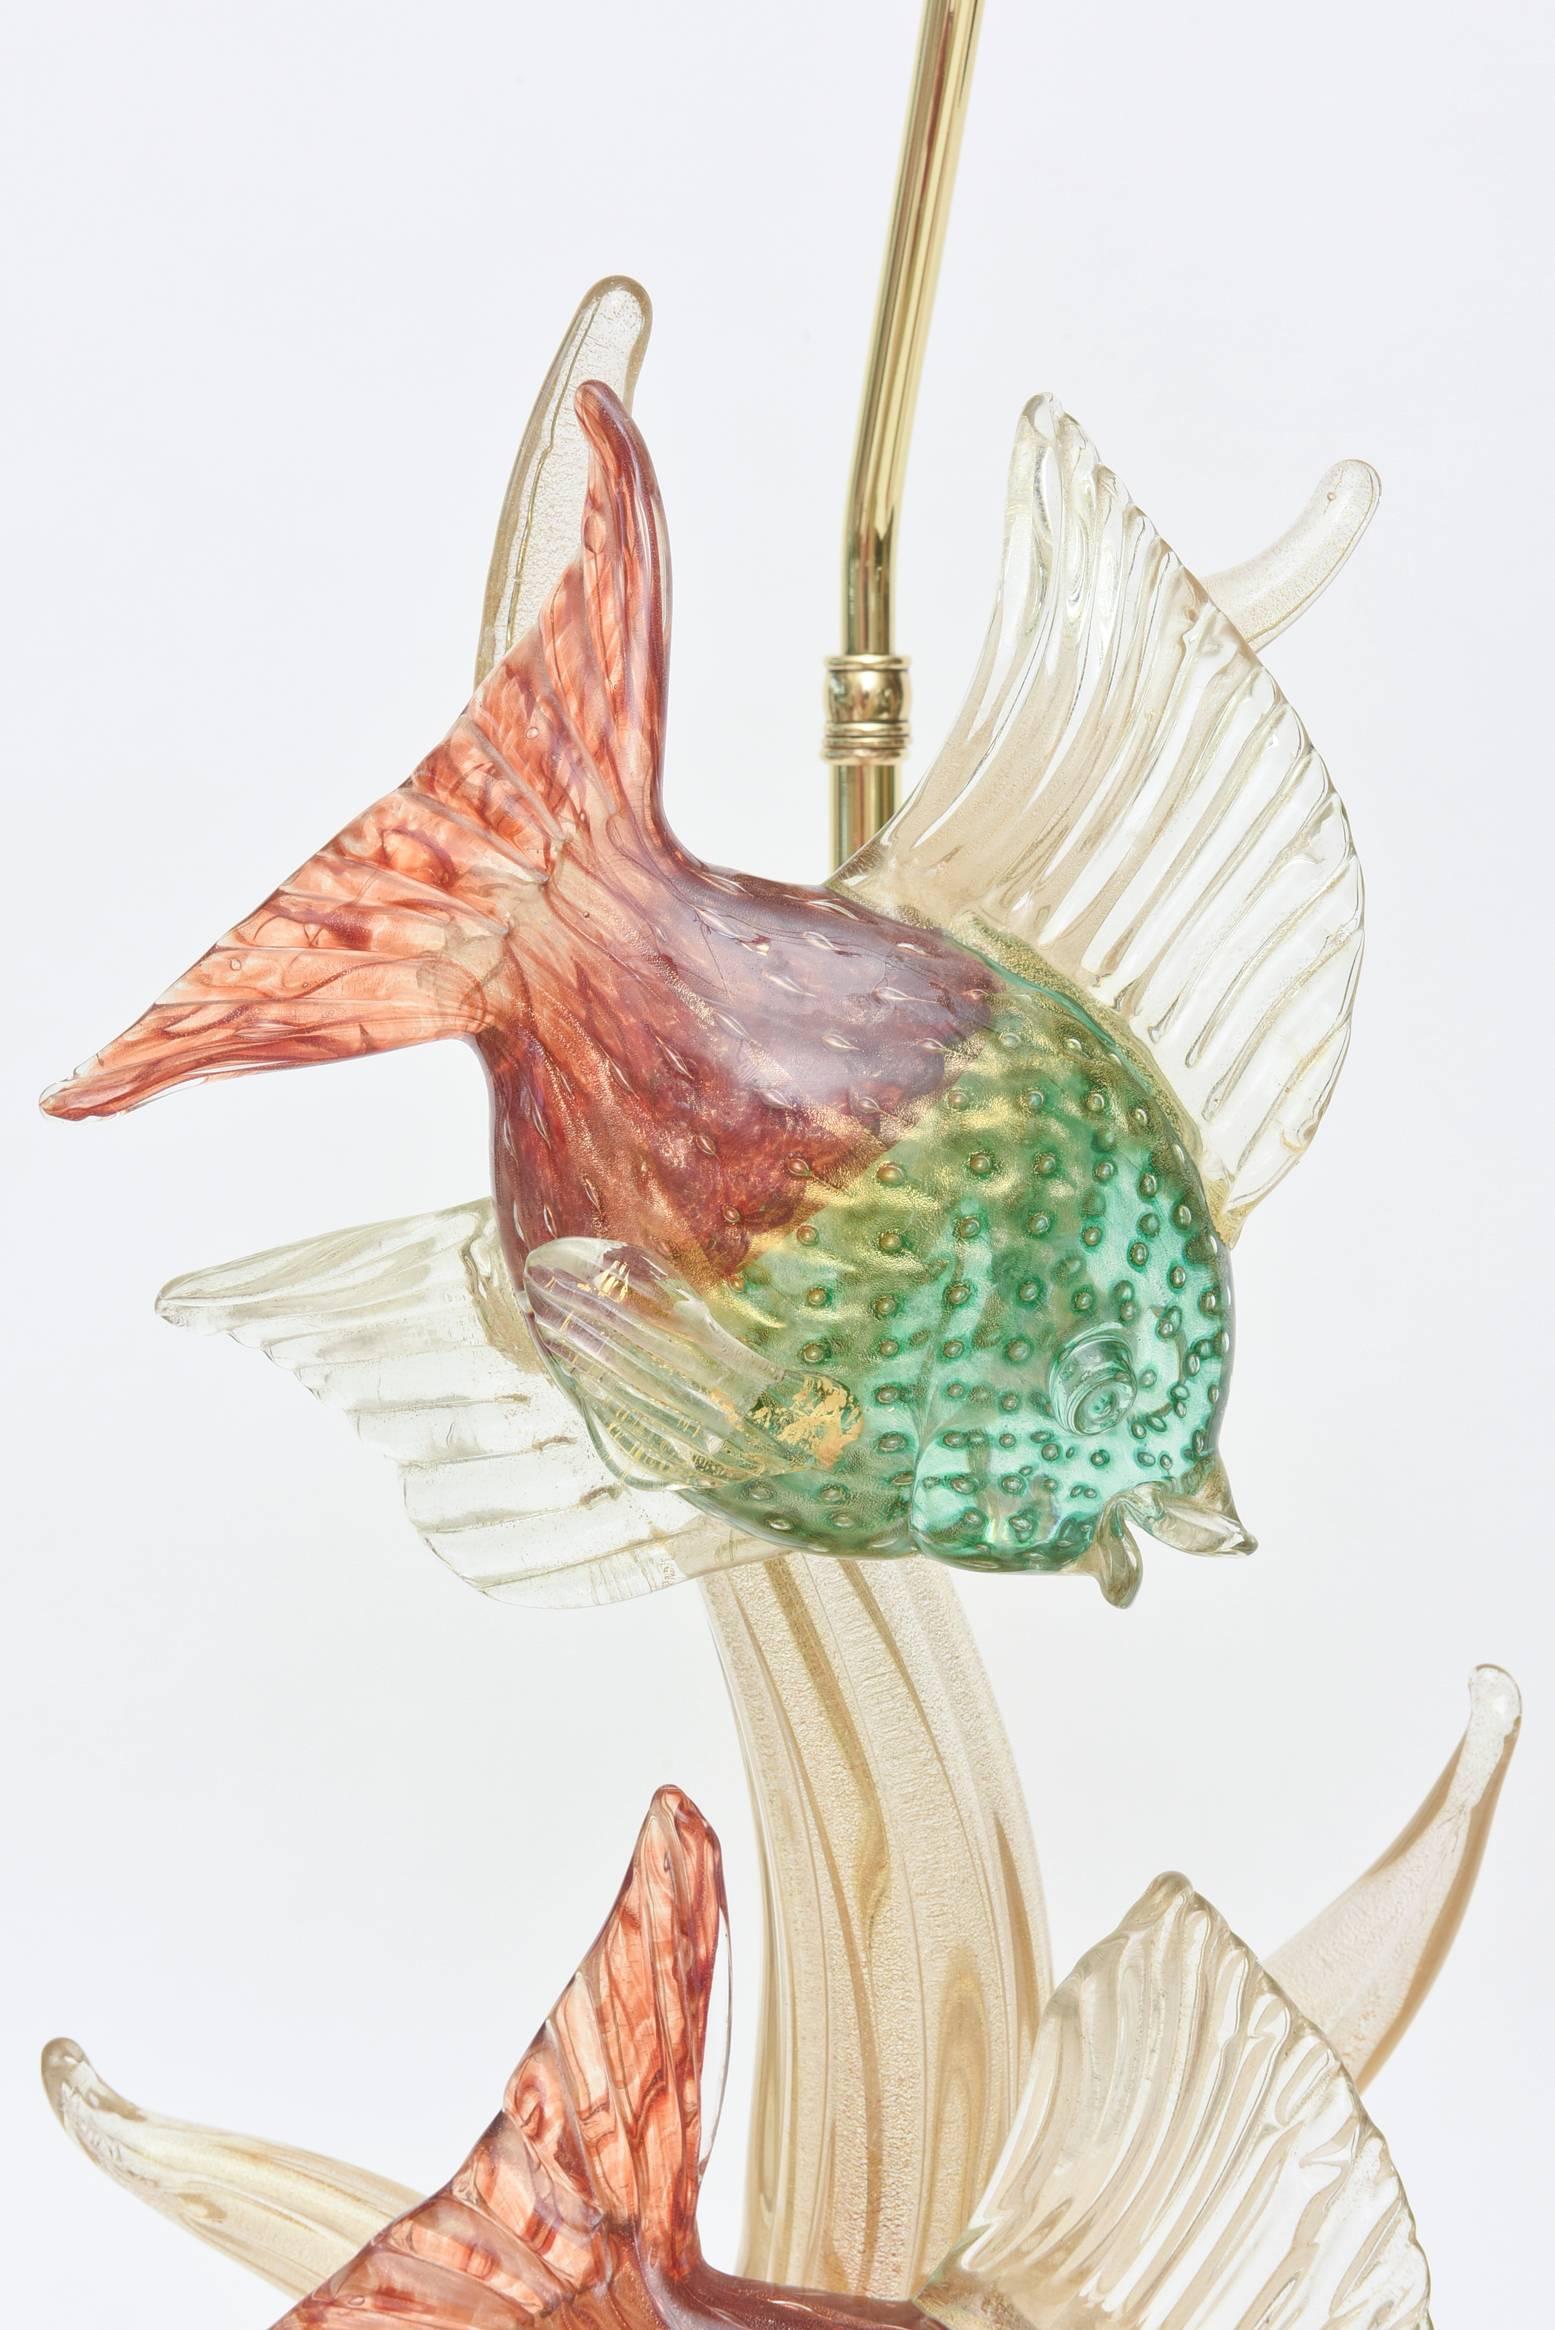 These very early, rare and gorgeous Italian Murano lamps by Barovier e Toso have tons of gold aventurine interspersed with the bullecante. (bubbles) The fish are beautiful in their rich elegant colors of sea green and cranberry red with gold and